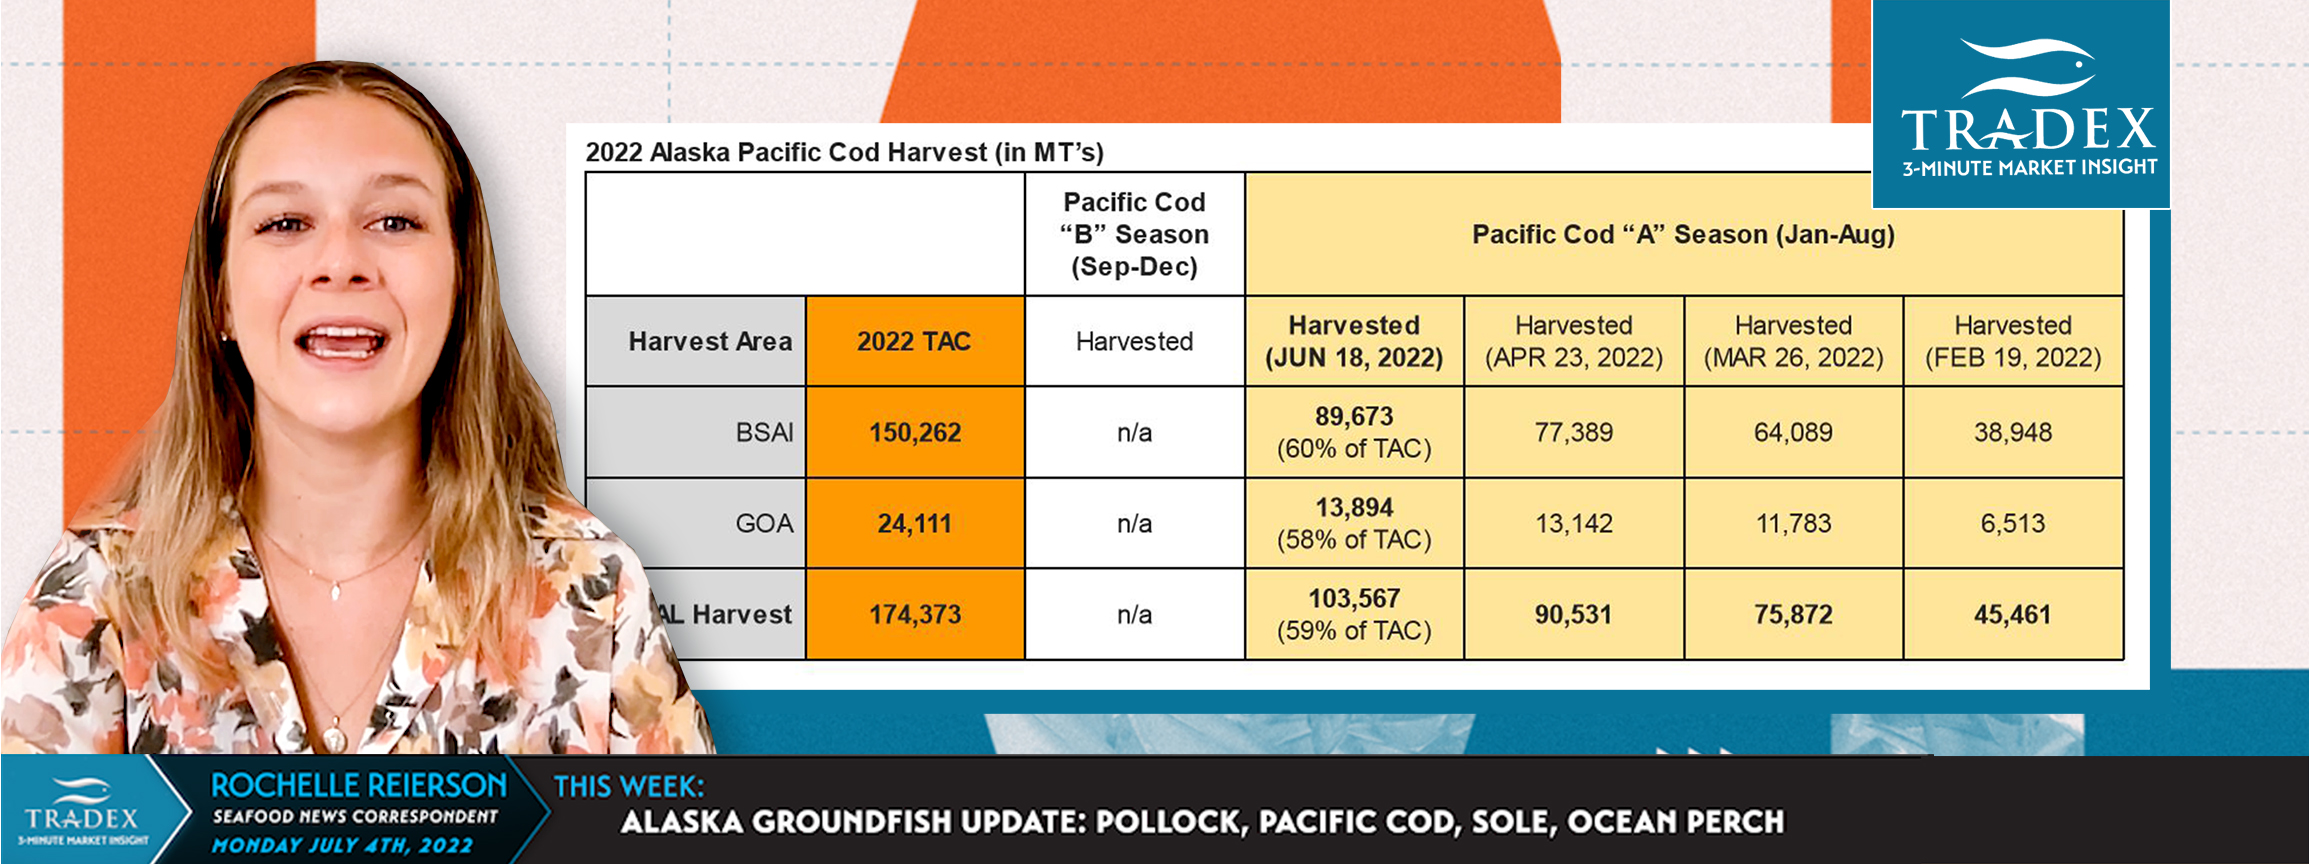 Alaska Groundfish Update: Pollock, Pacific Cod, Sole, Ocean Perch; 2.23 Million MT Remains to be Harvested